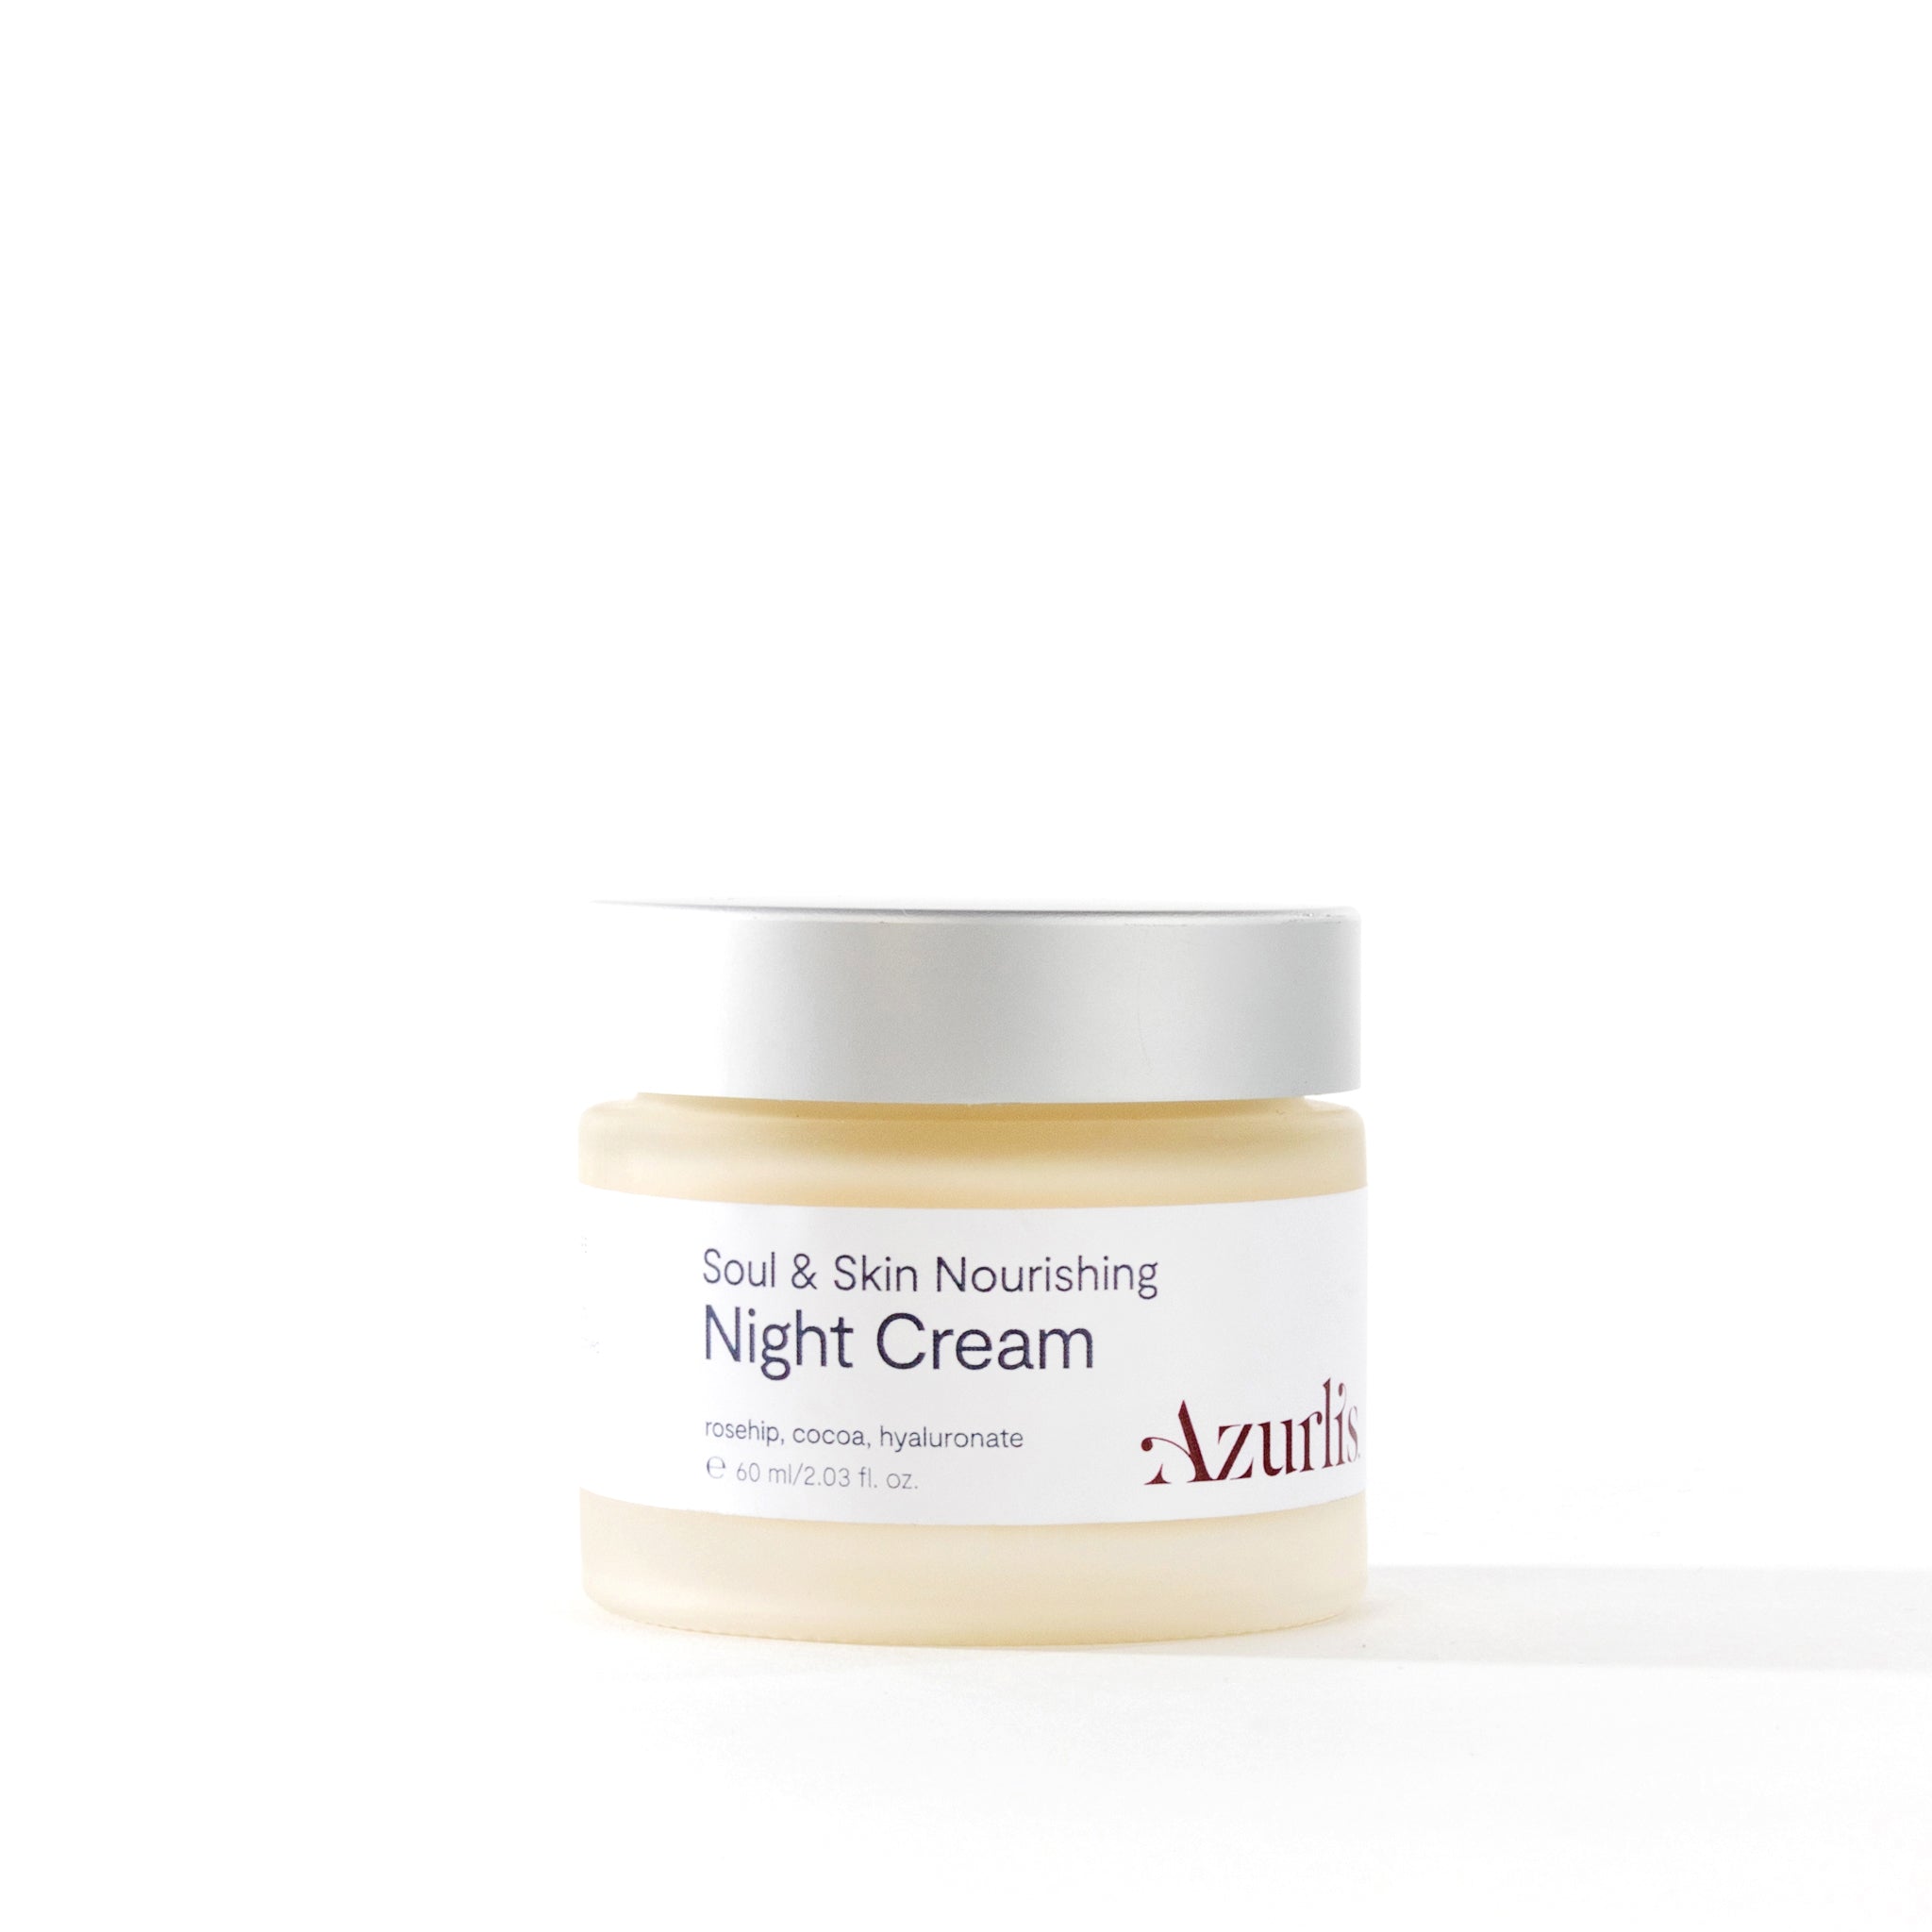 Azurlis™ Soul &amp; Skin Nourishing Night Cream 60/30ml is a balancing and Deeply Nourishing night moisturiser, to protect against the premature signs of ageing. Formulated to encourage repair during a restful night sleep for all skin types.